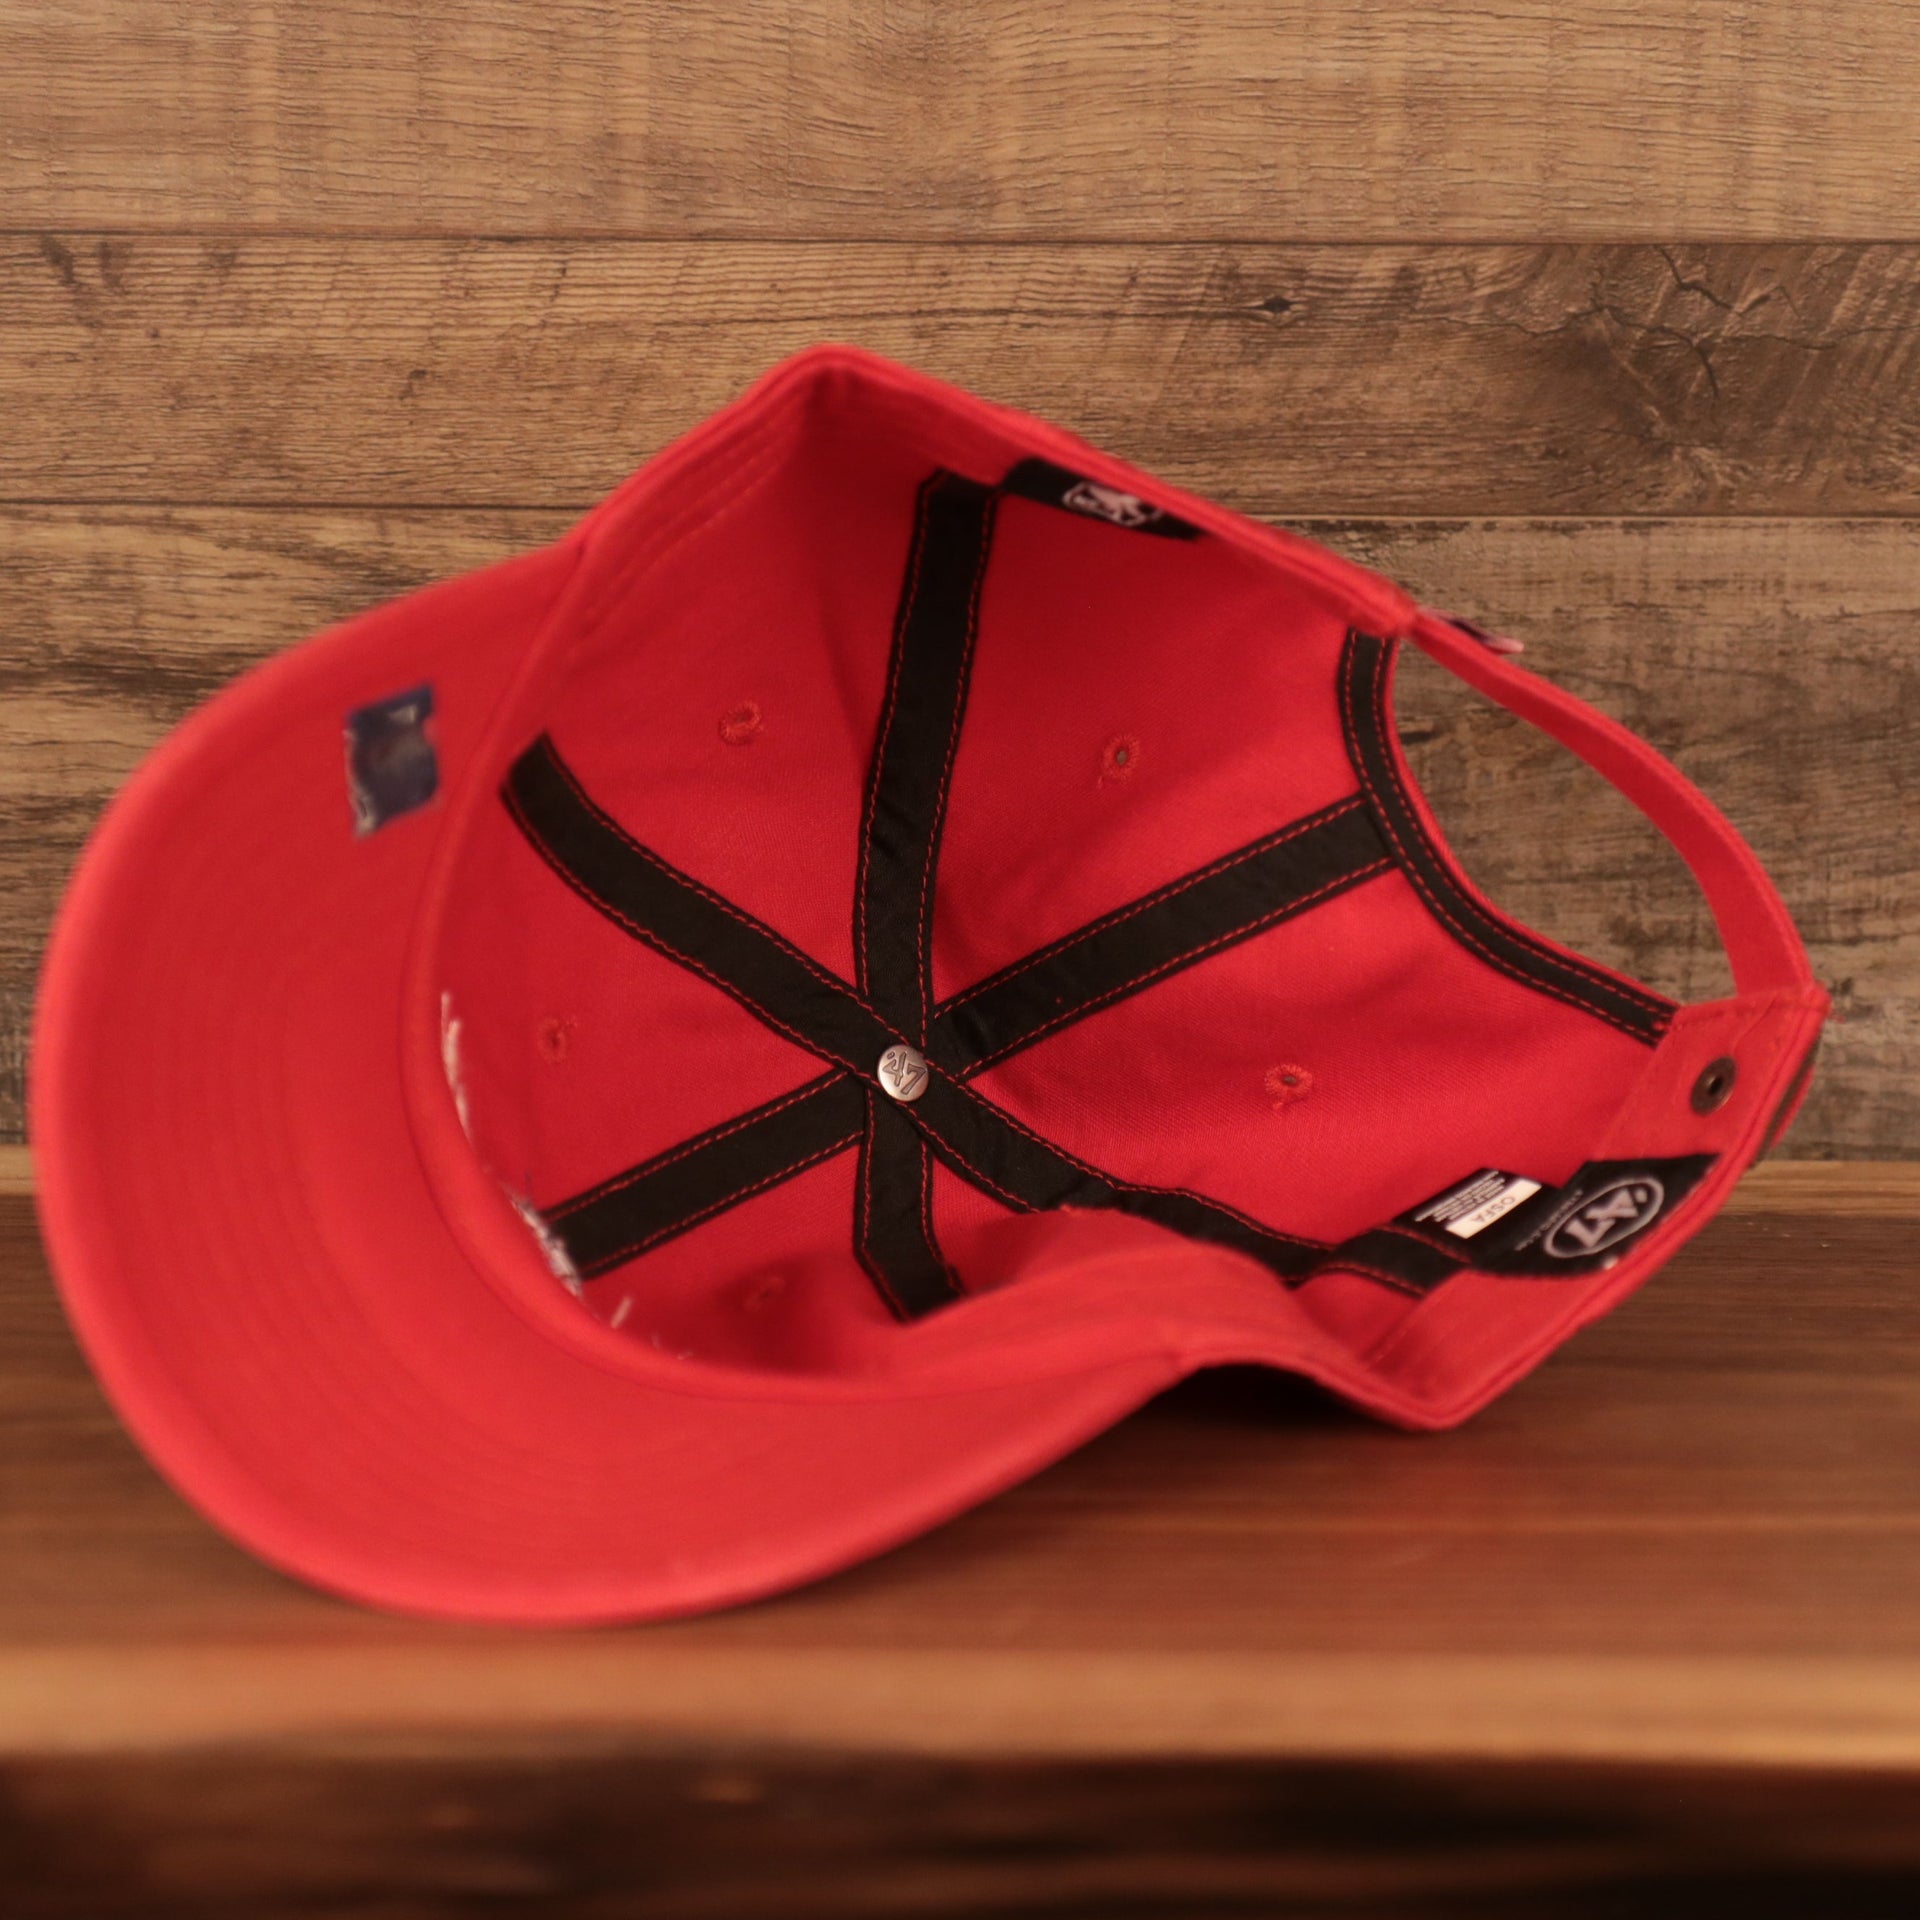 underside of the Los Angeles Clippers Red Adjustable Dad Hat